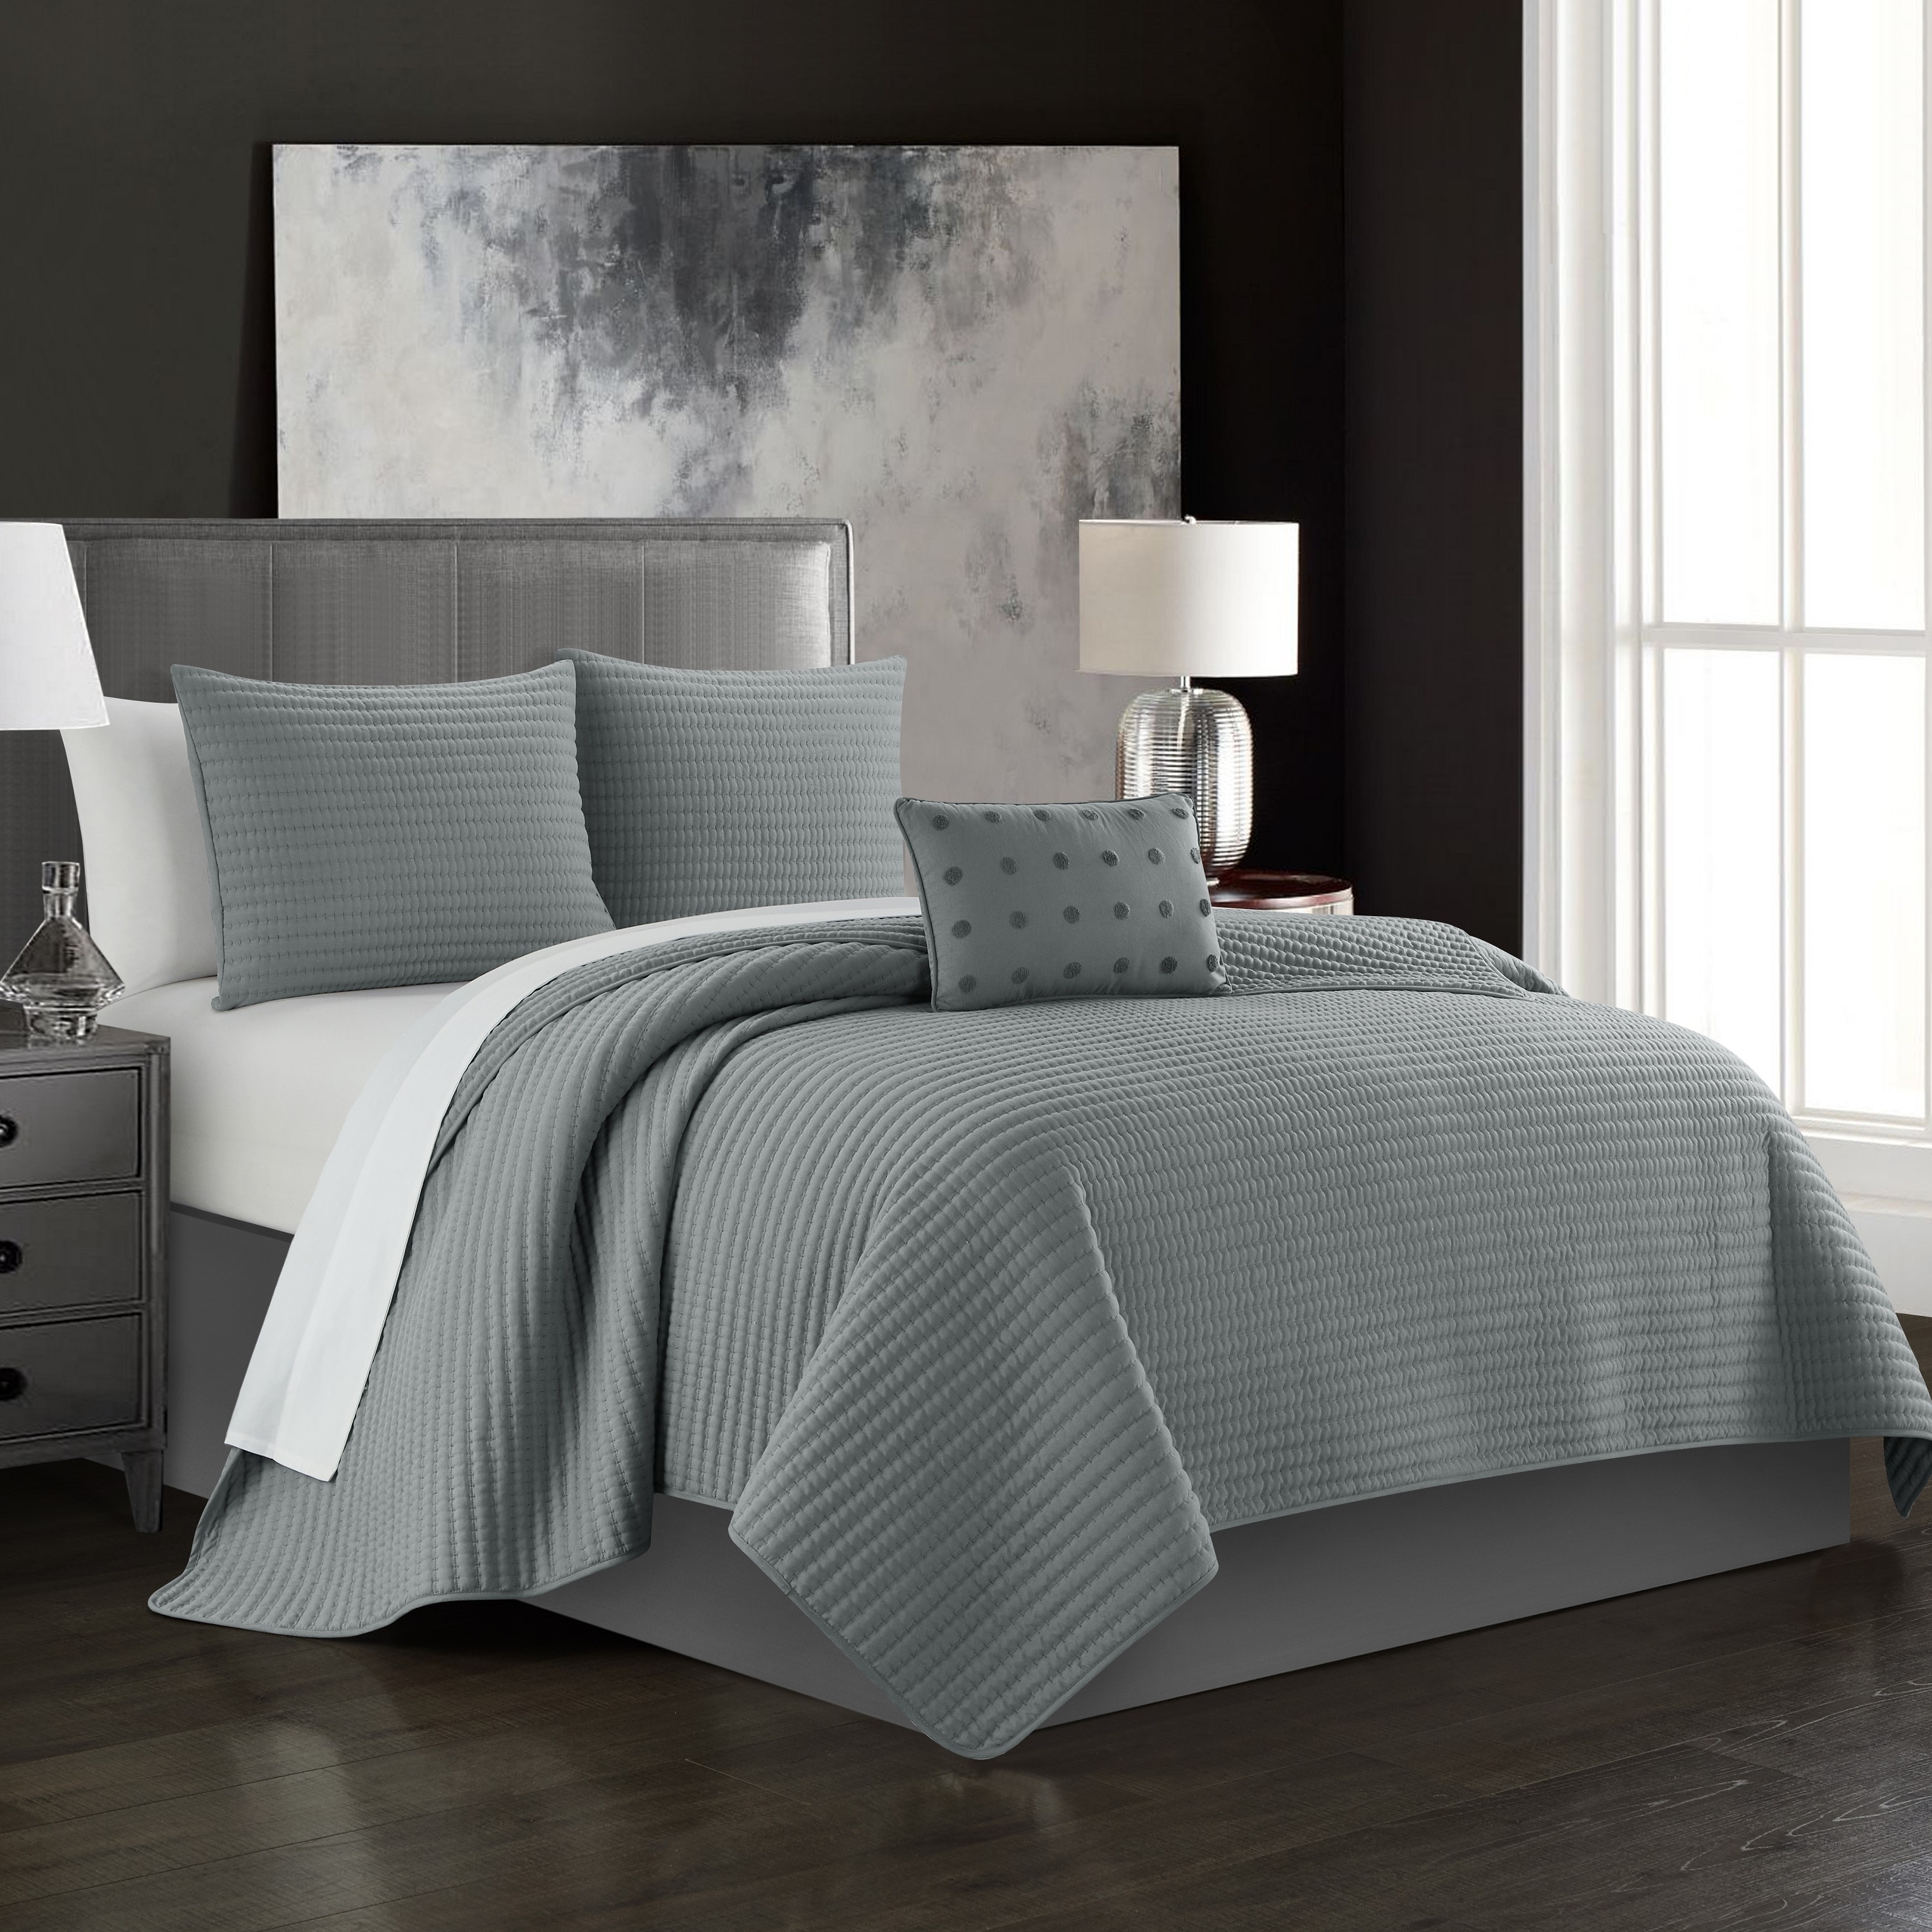 Hayden 4 Piece Quilt Set Striped Box Stitched Design Bedding - Decorative Pillow Shams Included - Grey, Queen